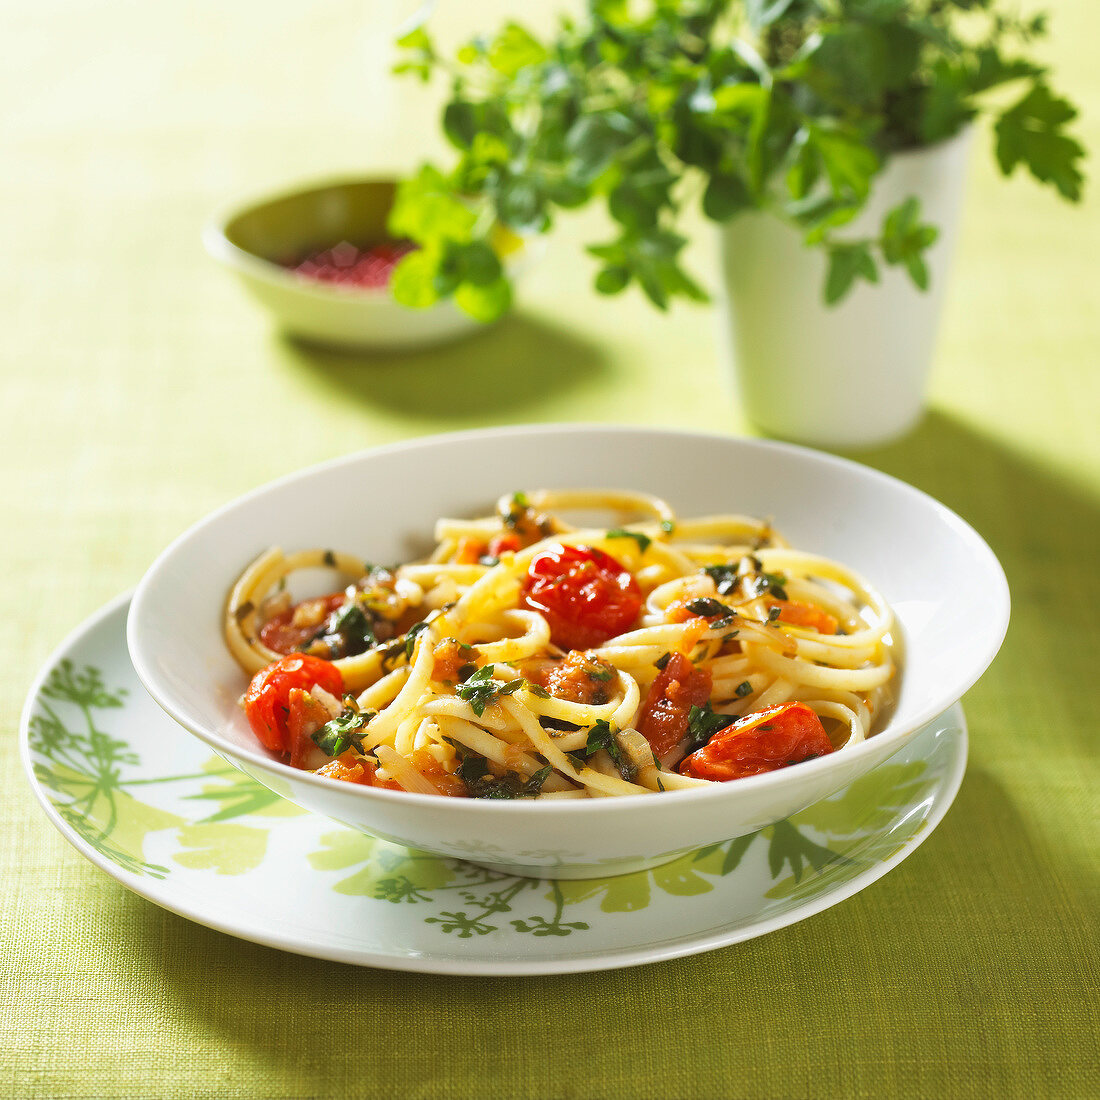 Linguine with basil and tomatoes